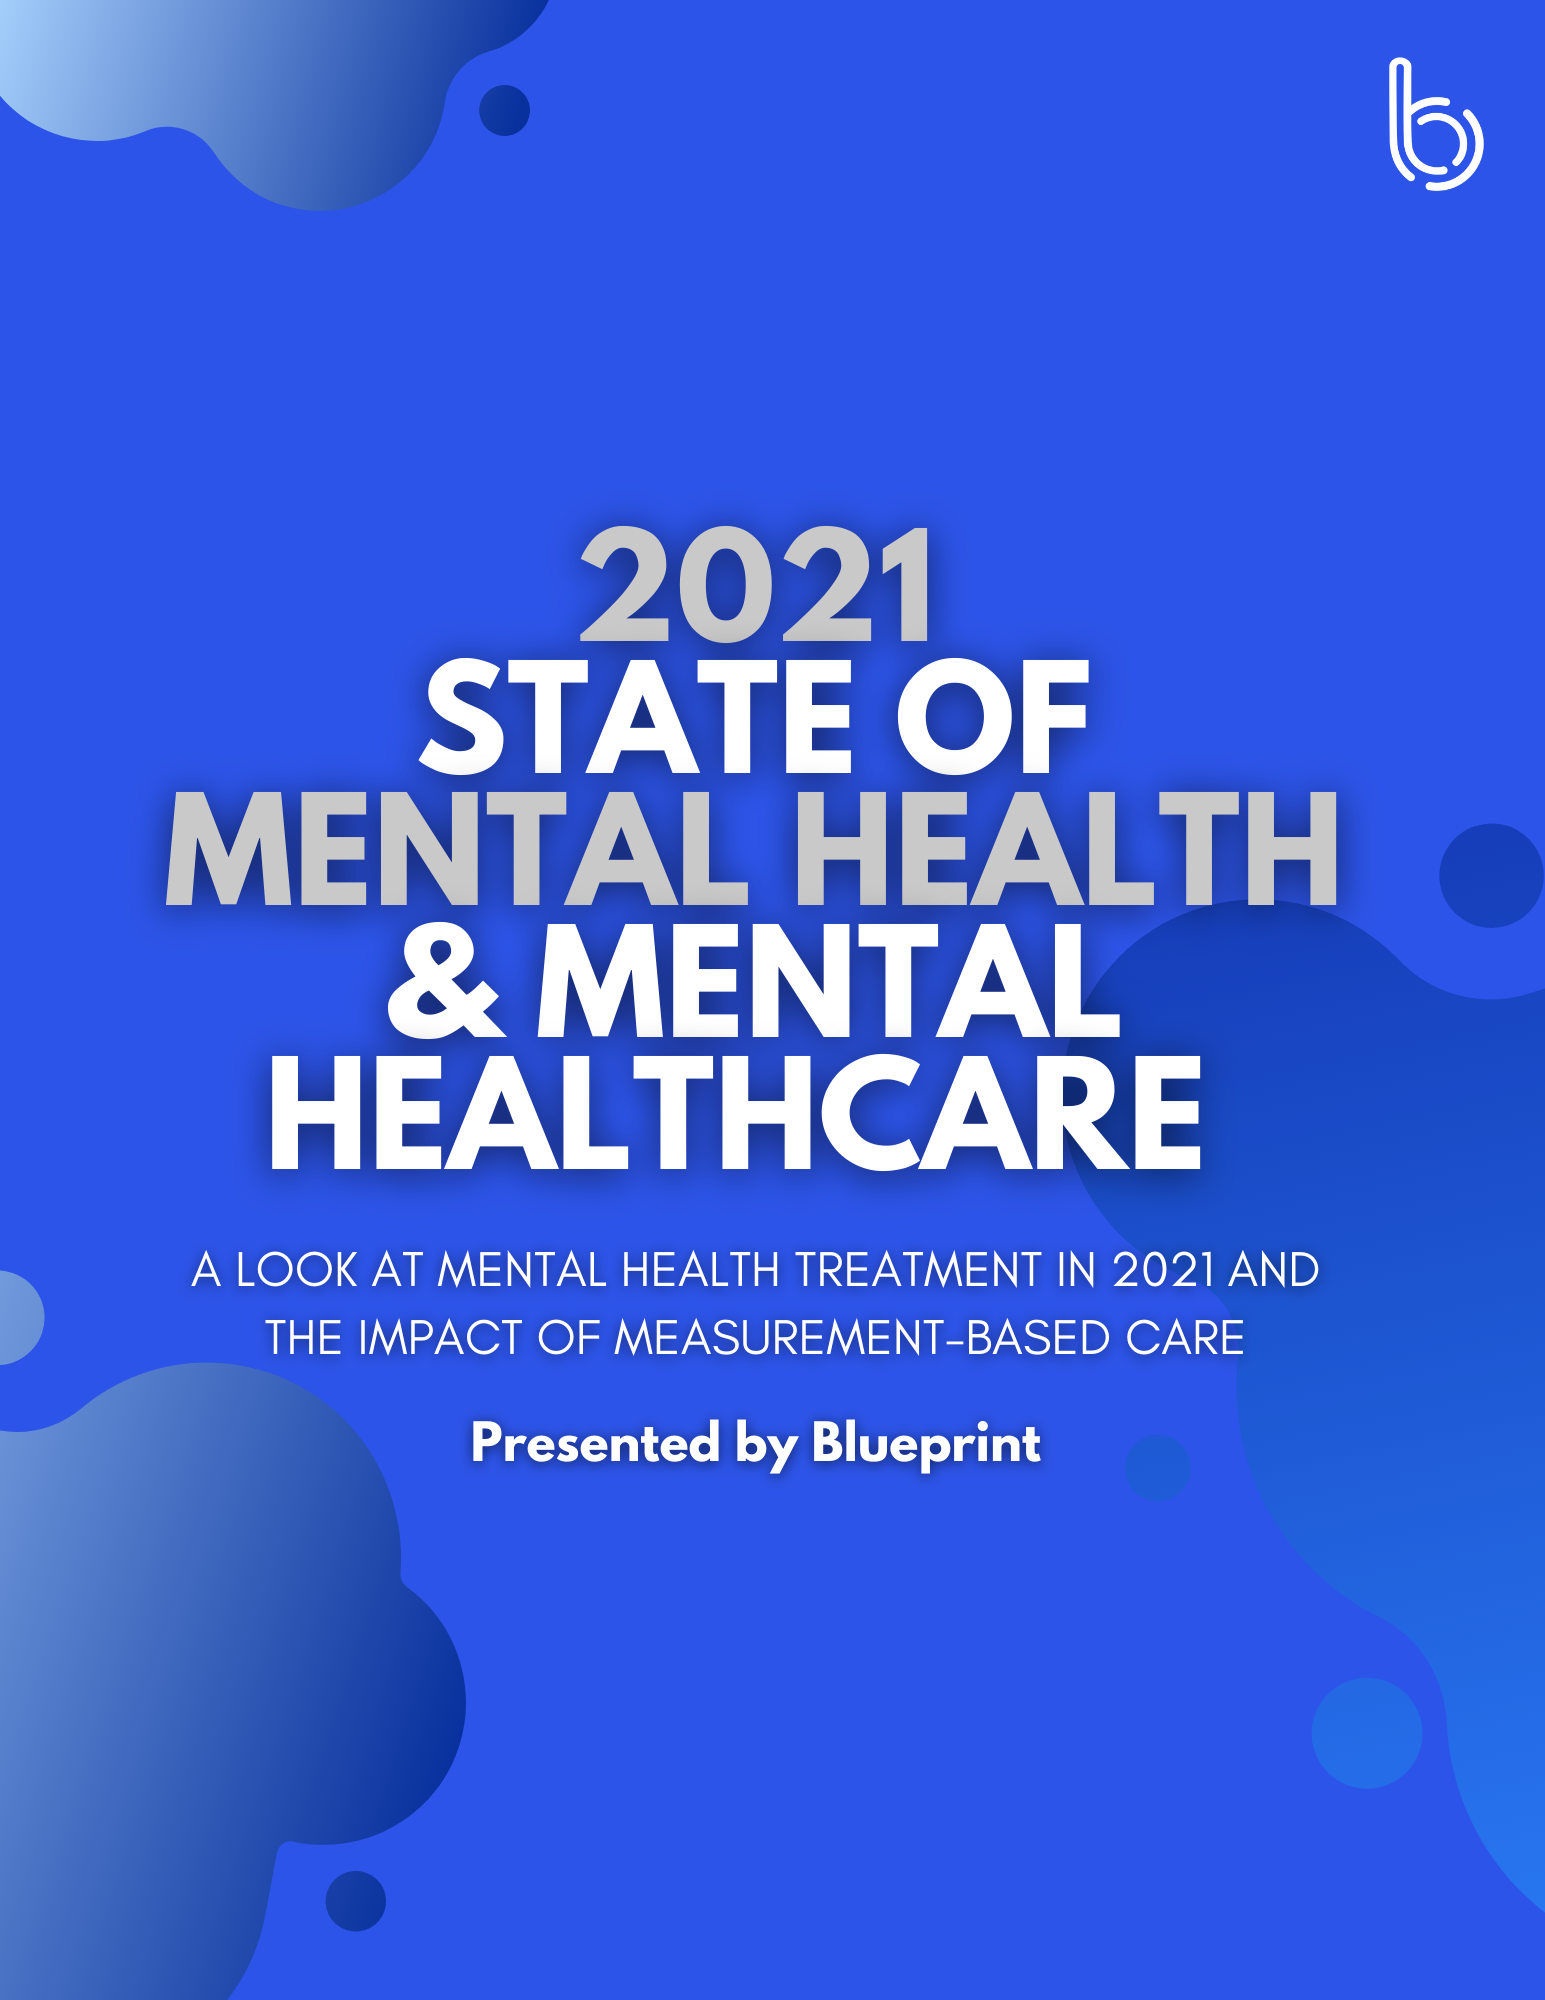 Copy of 2021 State of mental health & mental healthcare (1)